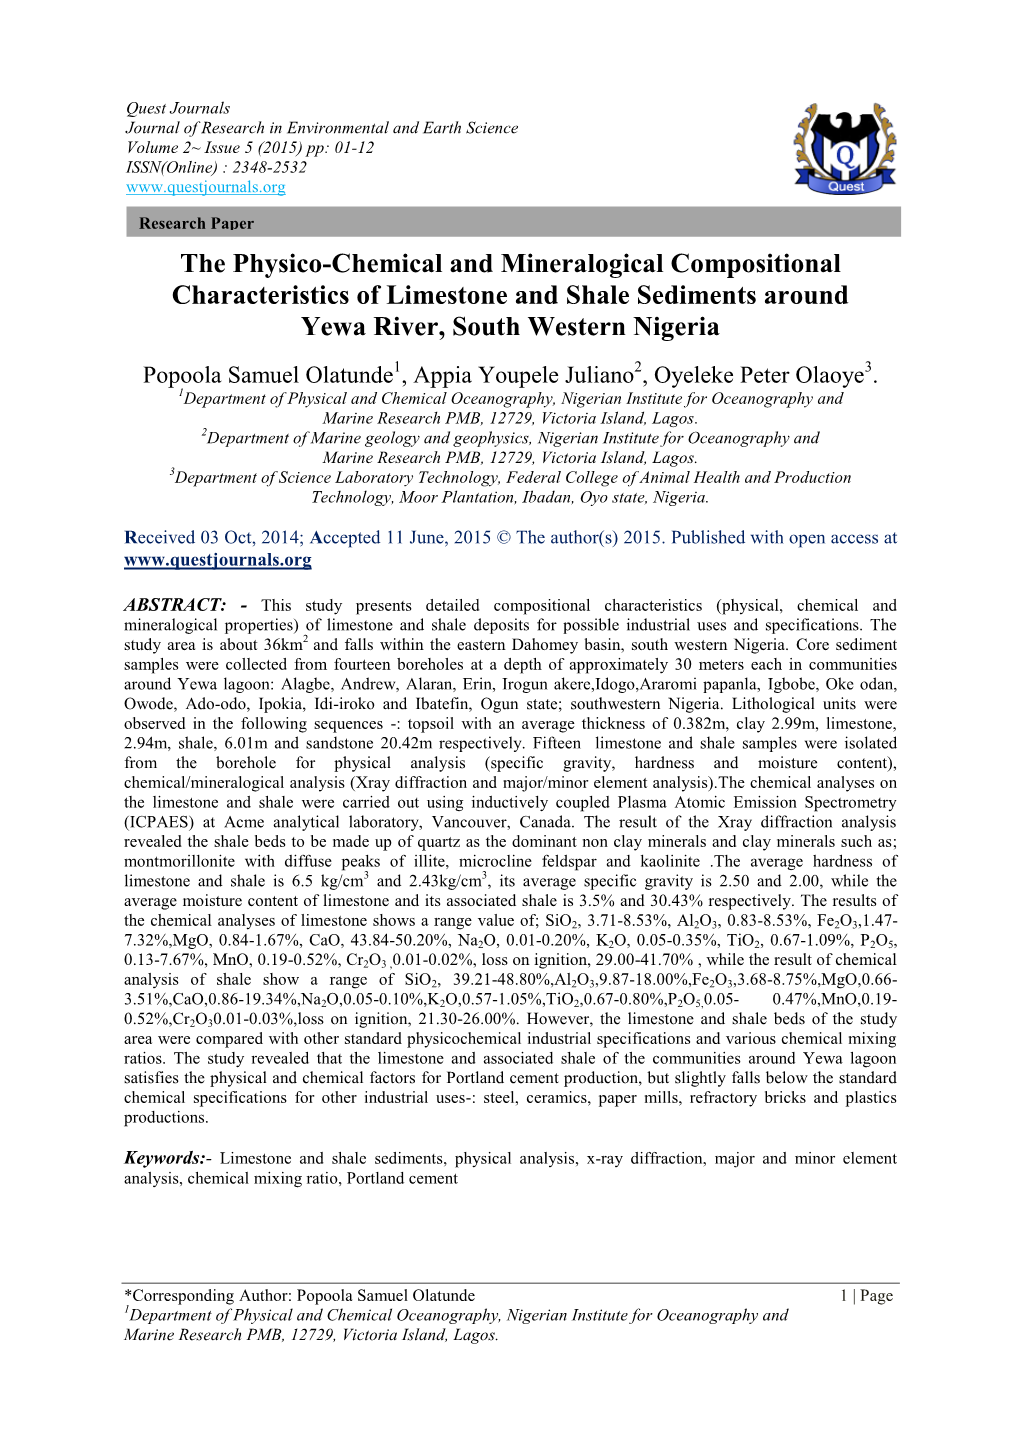 The Physico-Chemical and Mineralogical Compositional Characteristics of Limestone and Shale Sediments Around Yewa River, South Western Nigeria